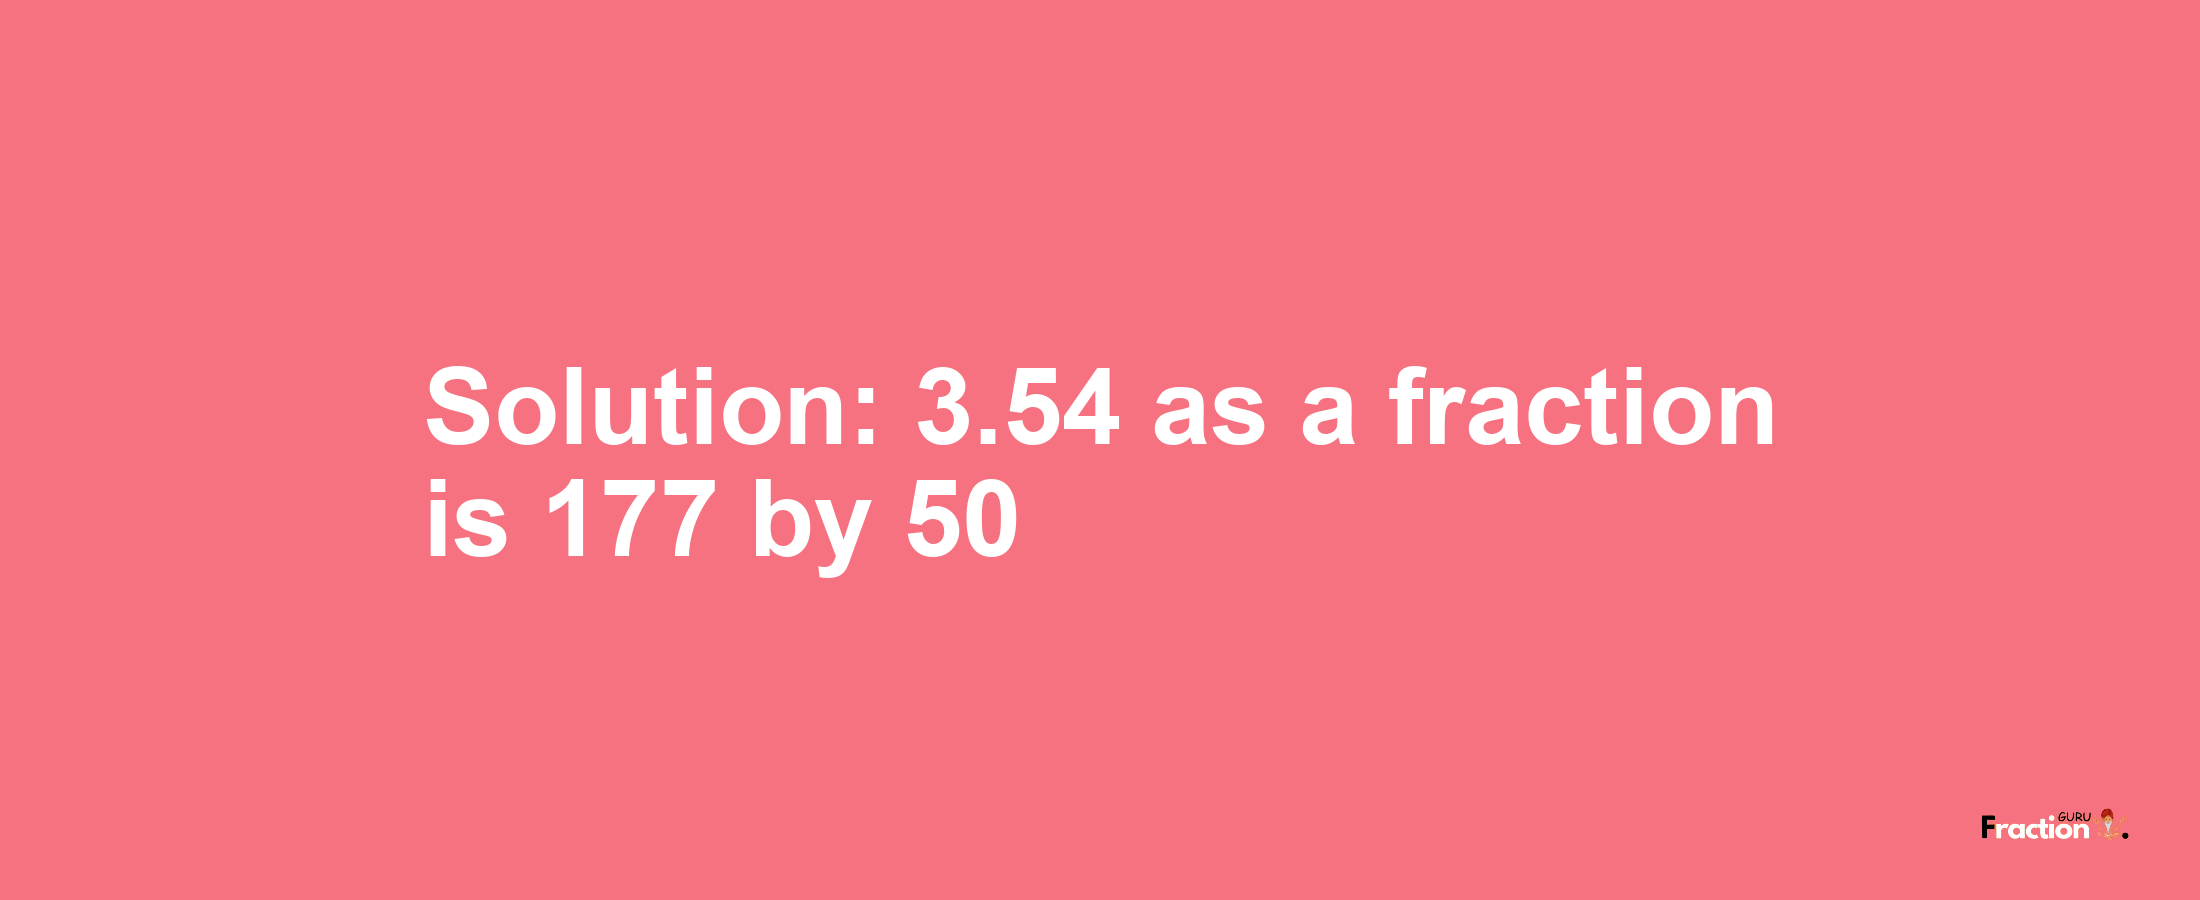 Solution:3.54 as a fraction is 177/50